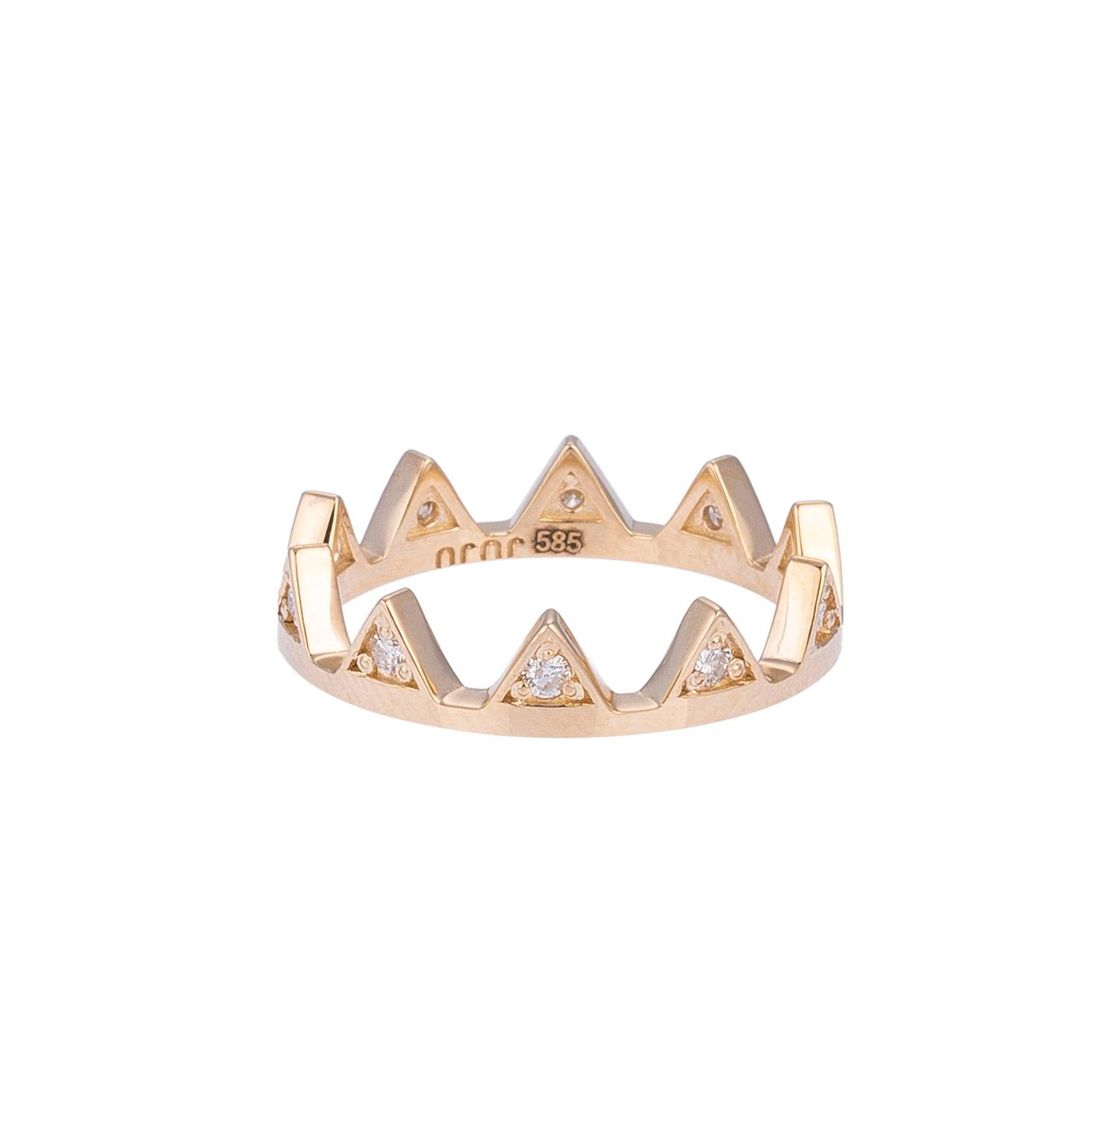 Salient Gold Ring with Diamonds Stones